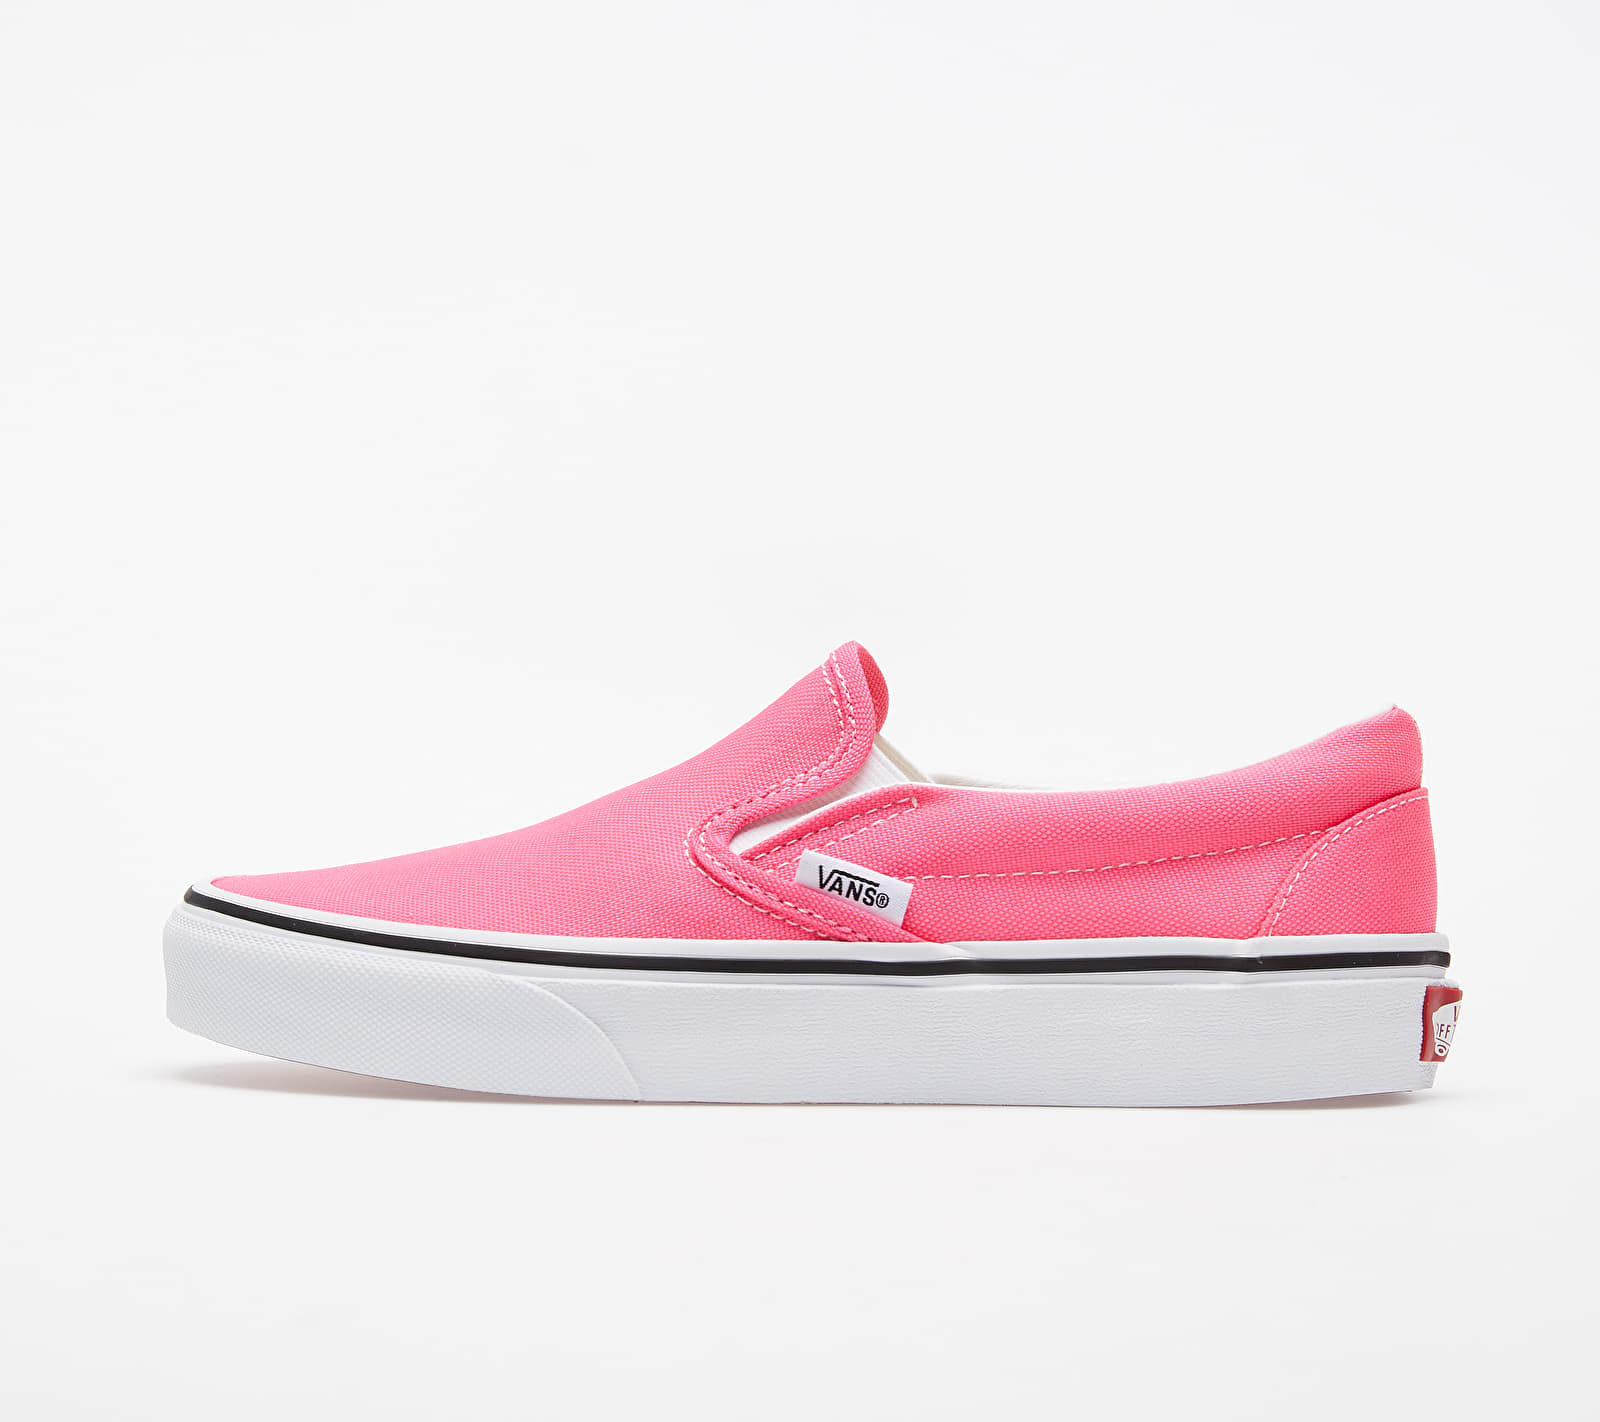 Vans Classic Slip-On (Neon) Knockout Pink/ True White VN0A4U38WT61